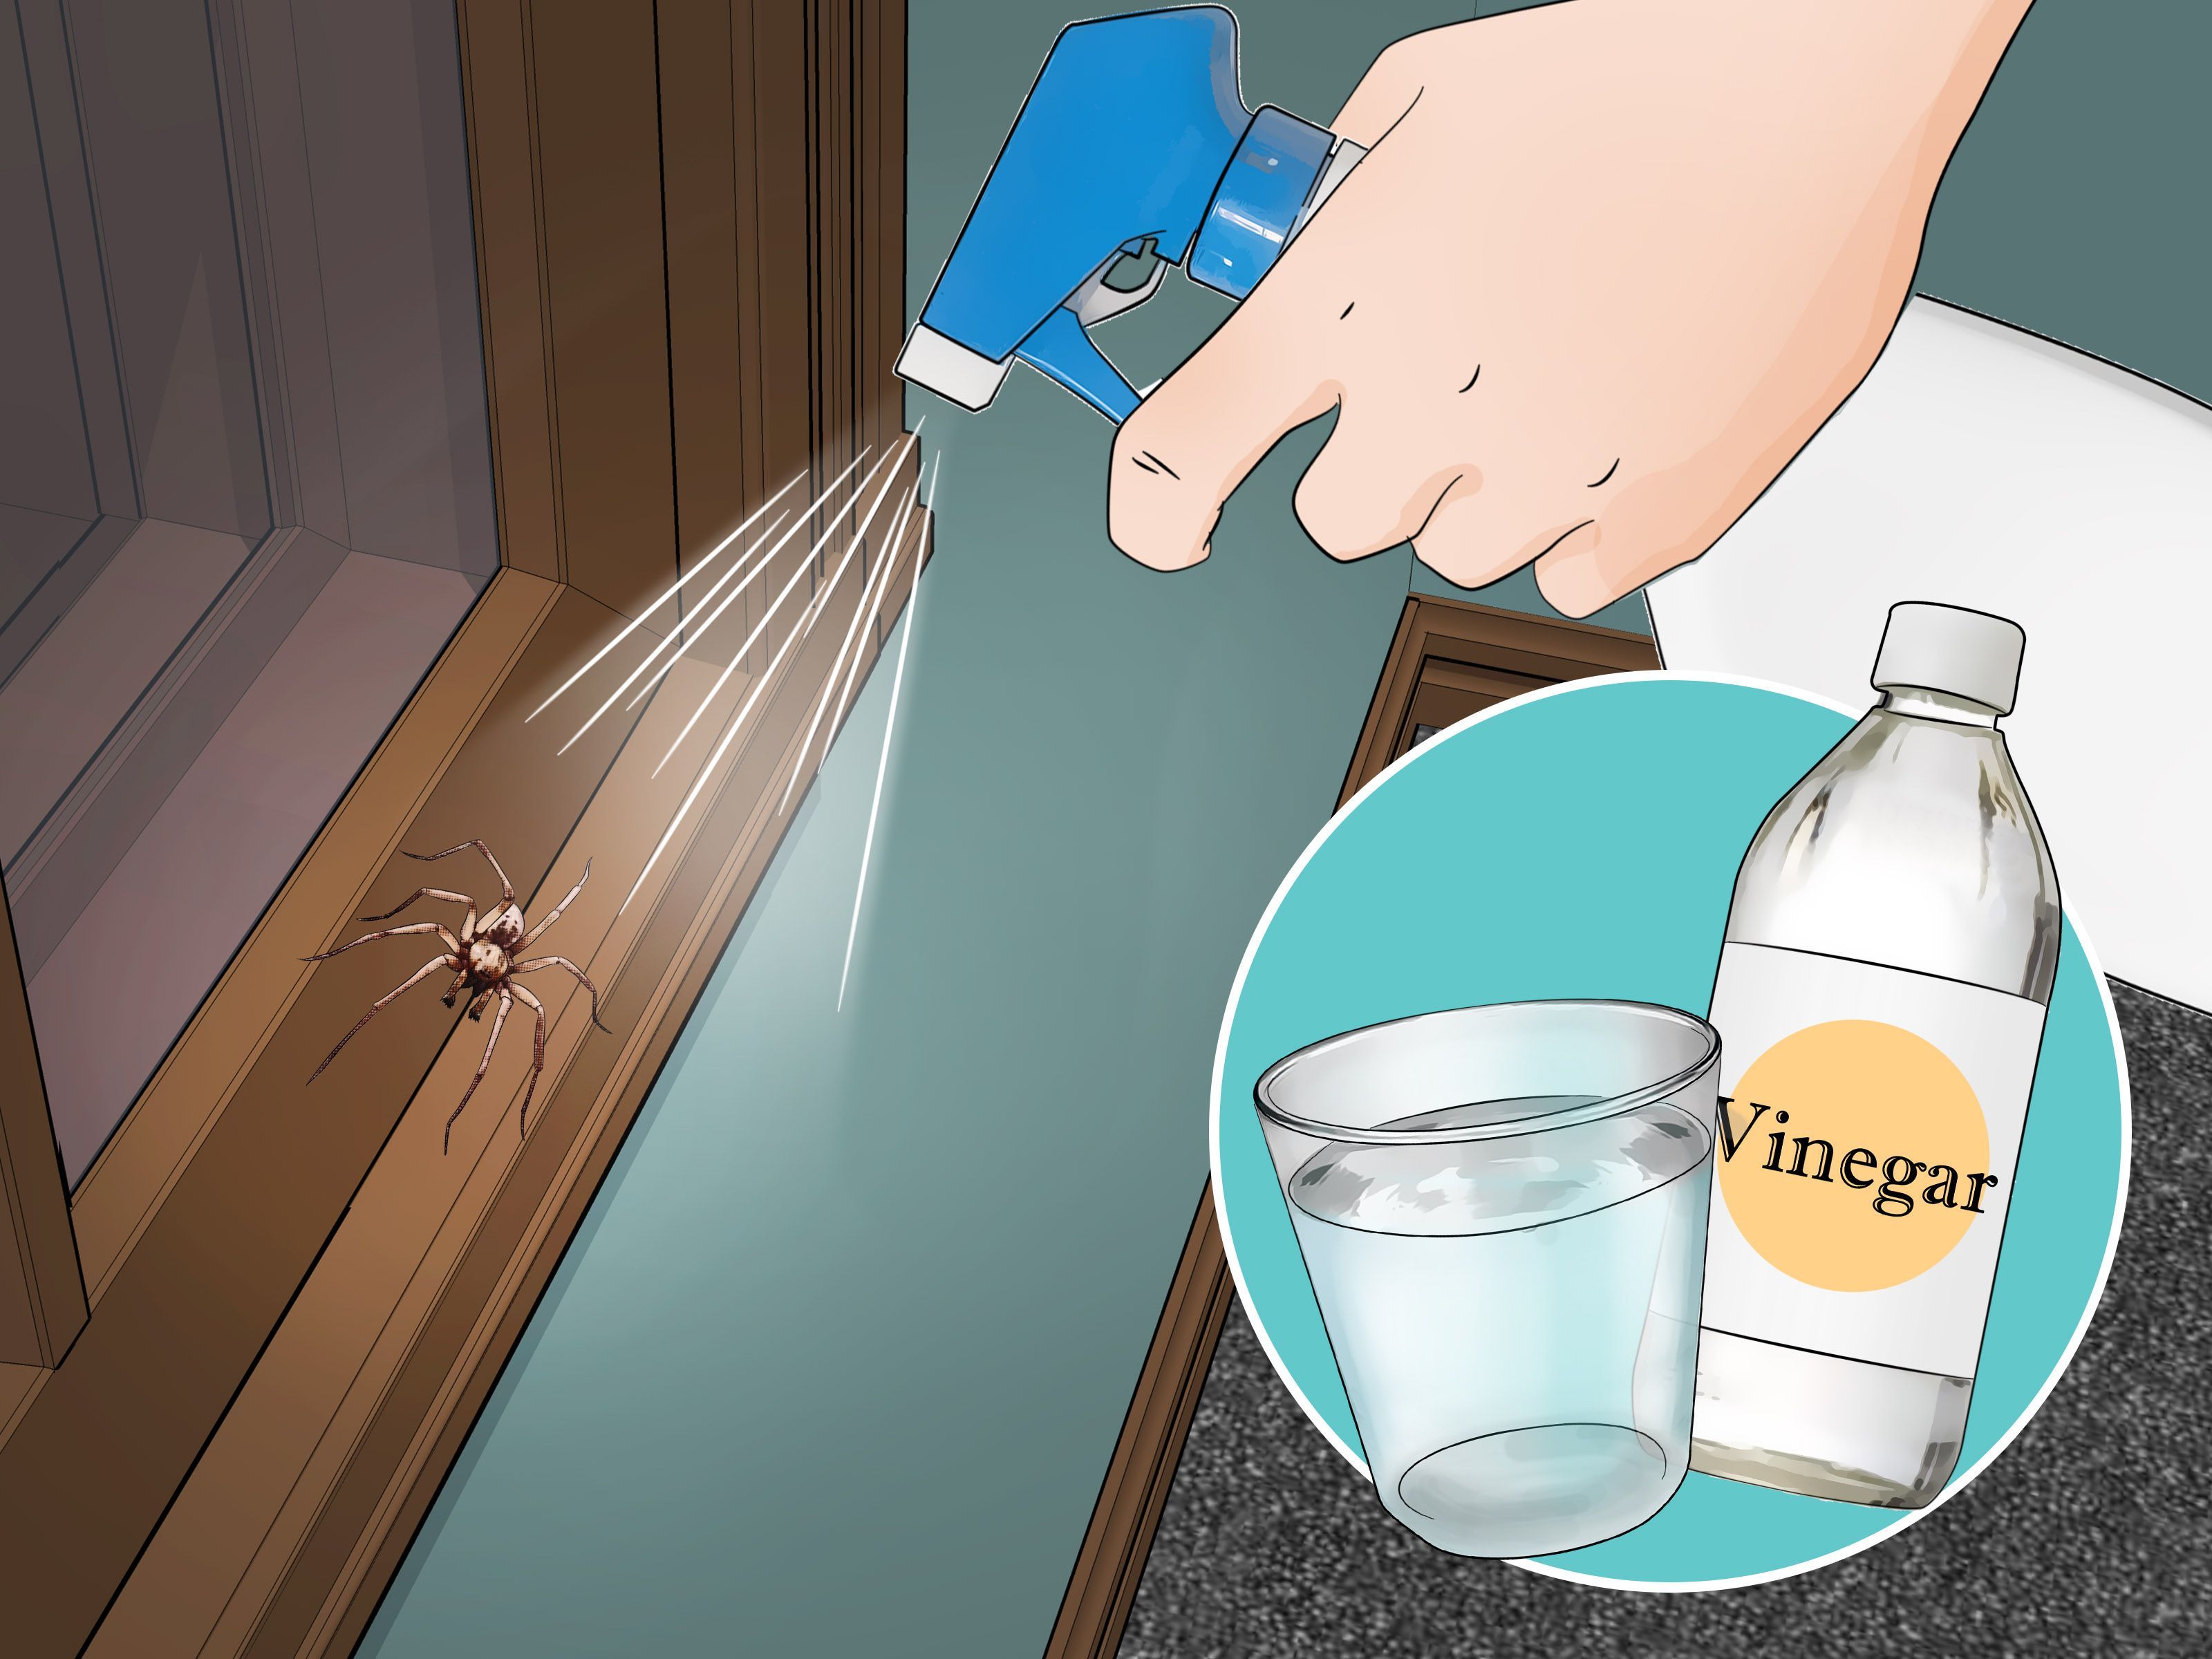 How to Get Rid of Spiders in the House -   19 how to get rid of spiders in the house ideas